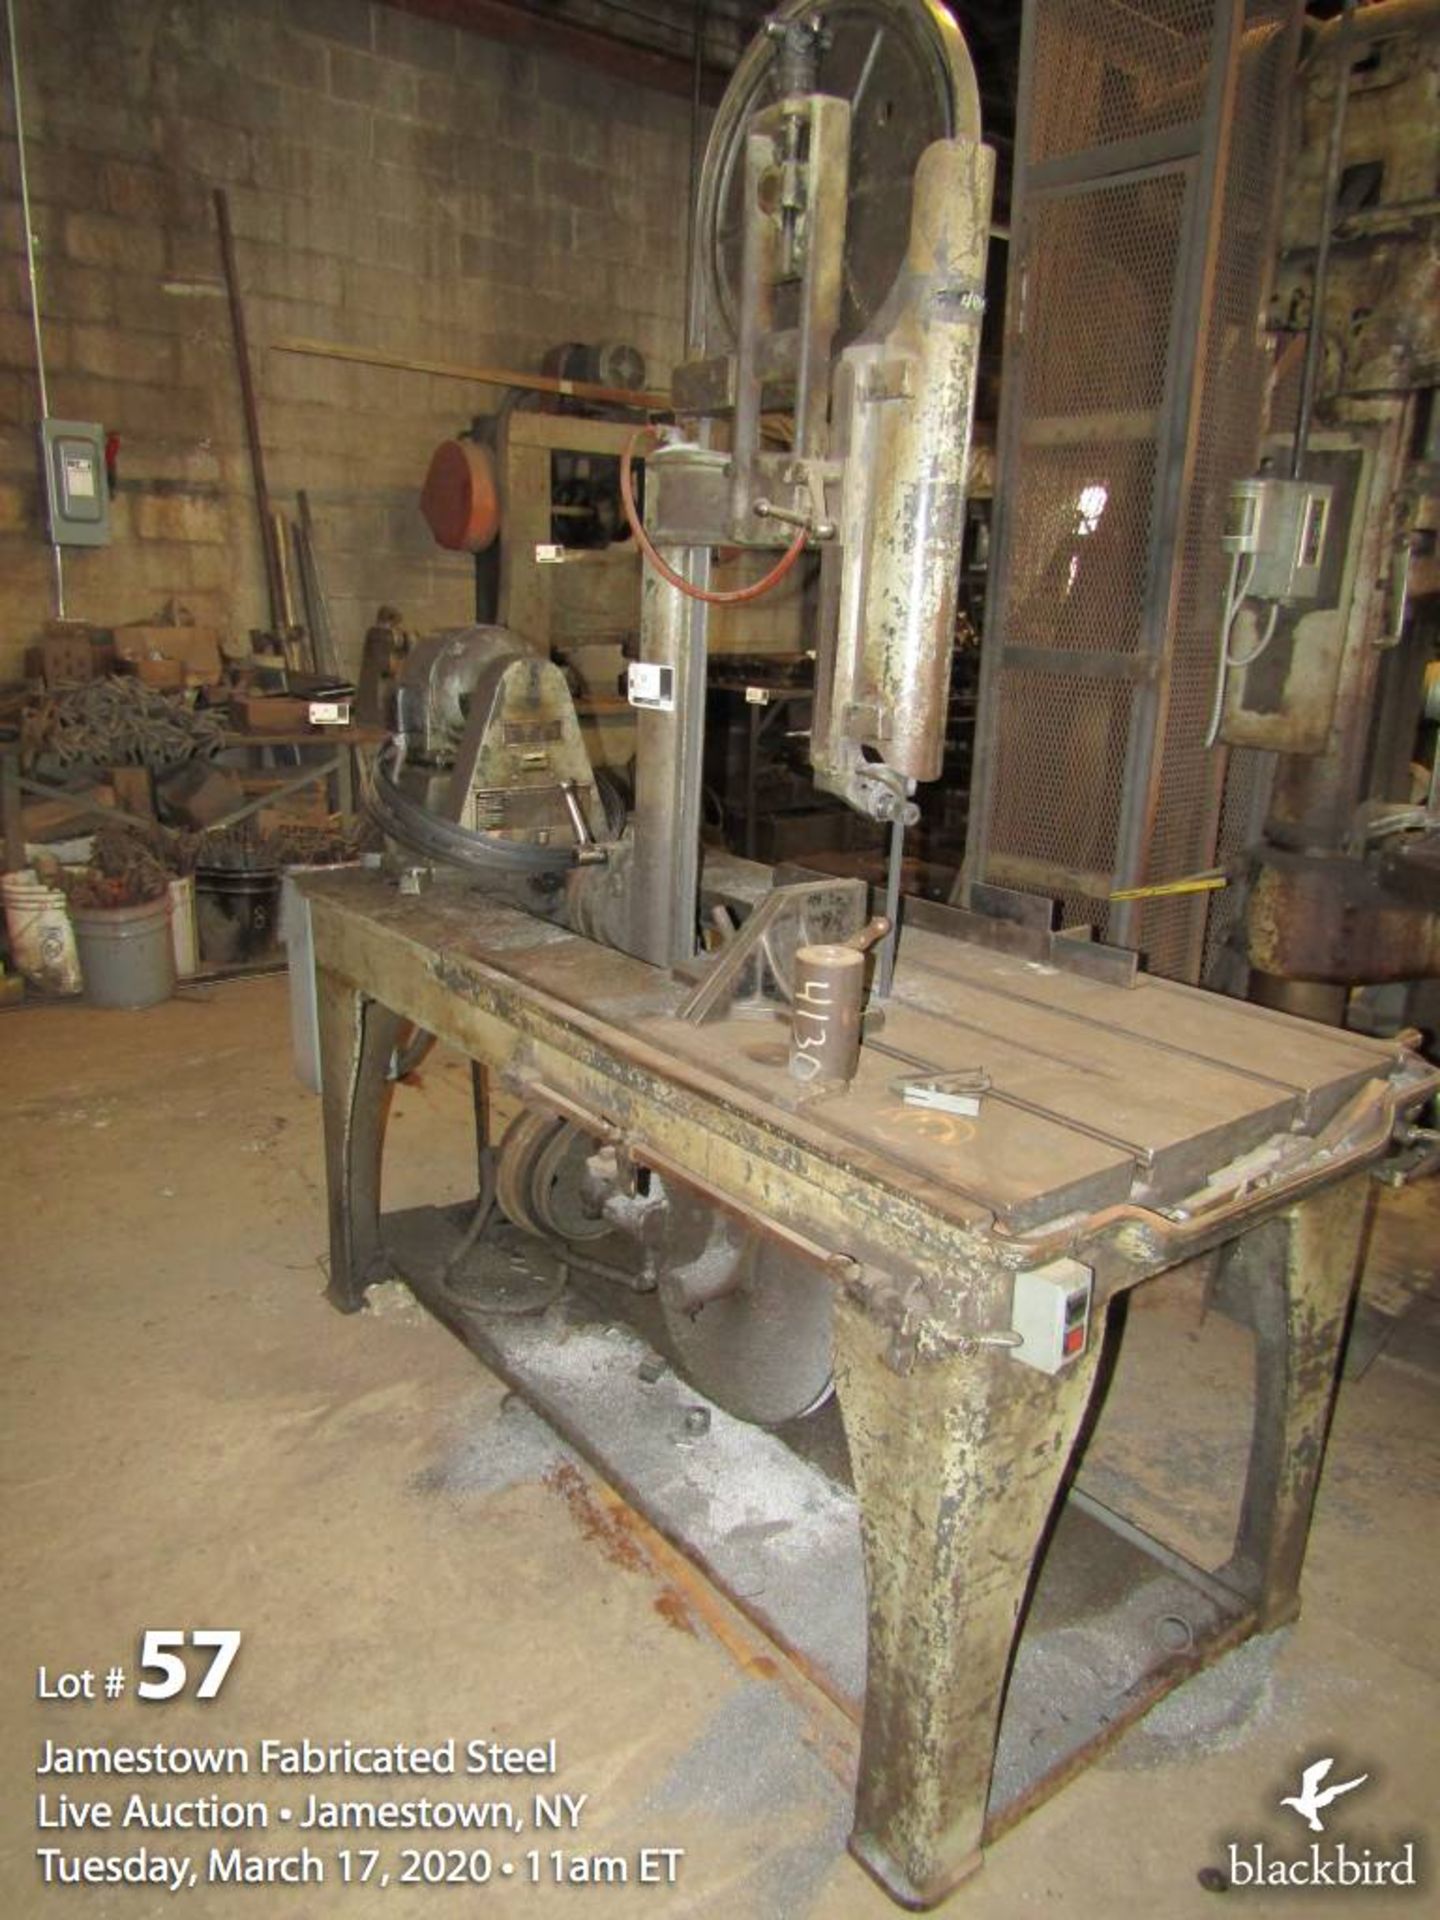 Marvel belt driven band saw 6 speed approx. 20" cut, 1hp. 3ph.